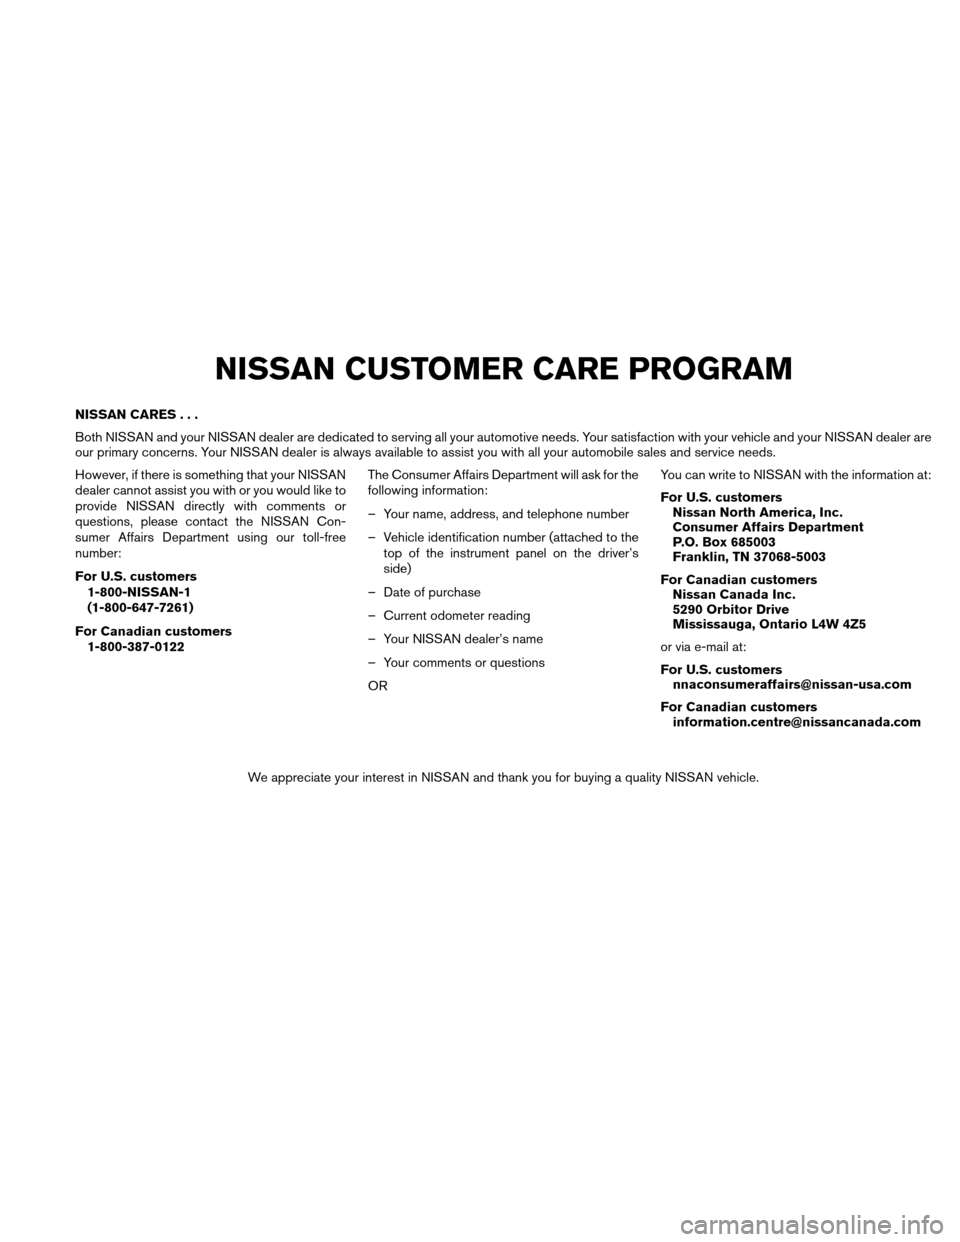 NISSAN XTERRA 2011 N50 / 2.G Owners Manual NISSAN CARES...
Both NISSAN and your NISSAN dealer are dedicated to serving all your automotive needs. Your satisfaction with your vehicle and your NISSAN dealer are
our primary concerns. Your NISSAN 